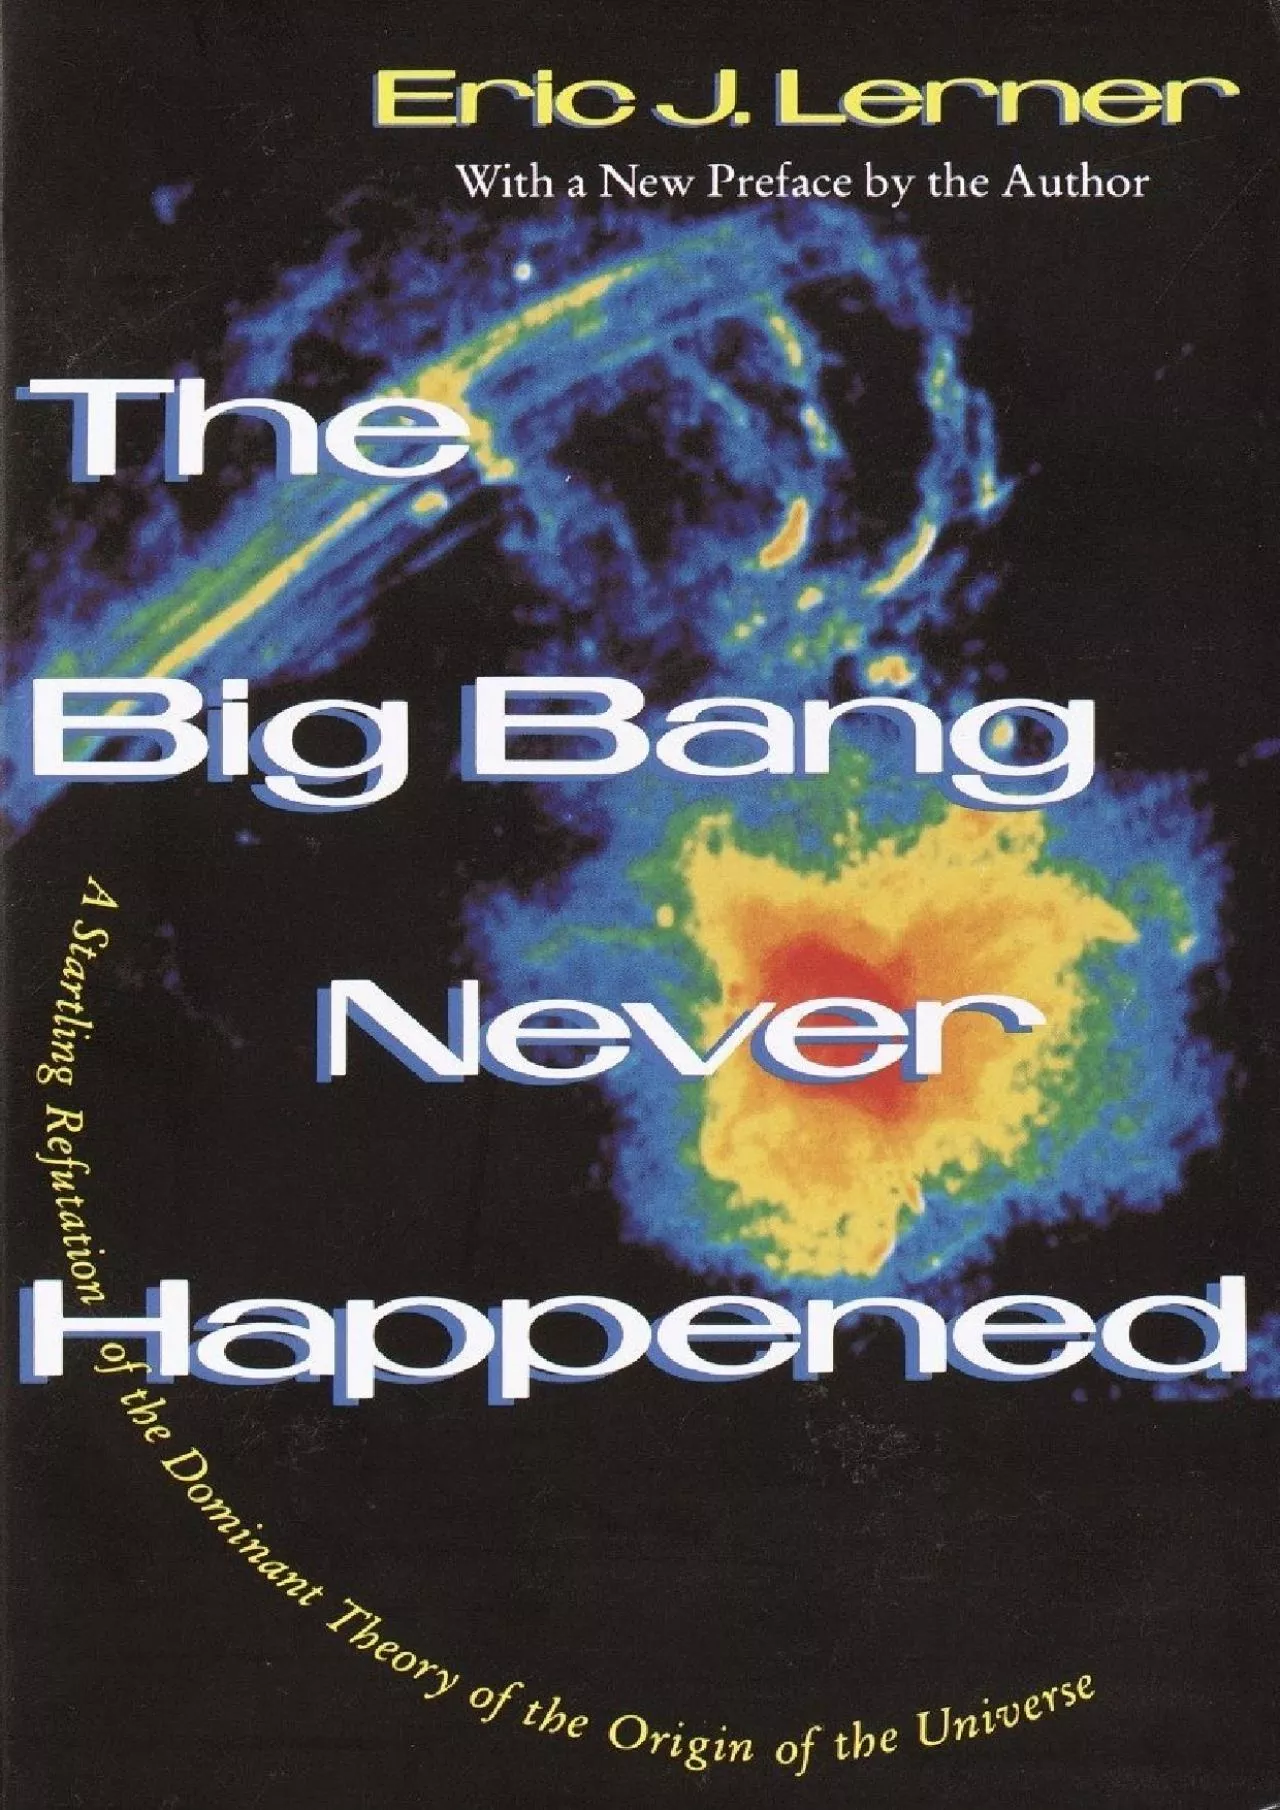 (BOOK)-The Big Bang Never Happened: A Startling Refutation of the Dominant Theory of the